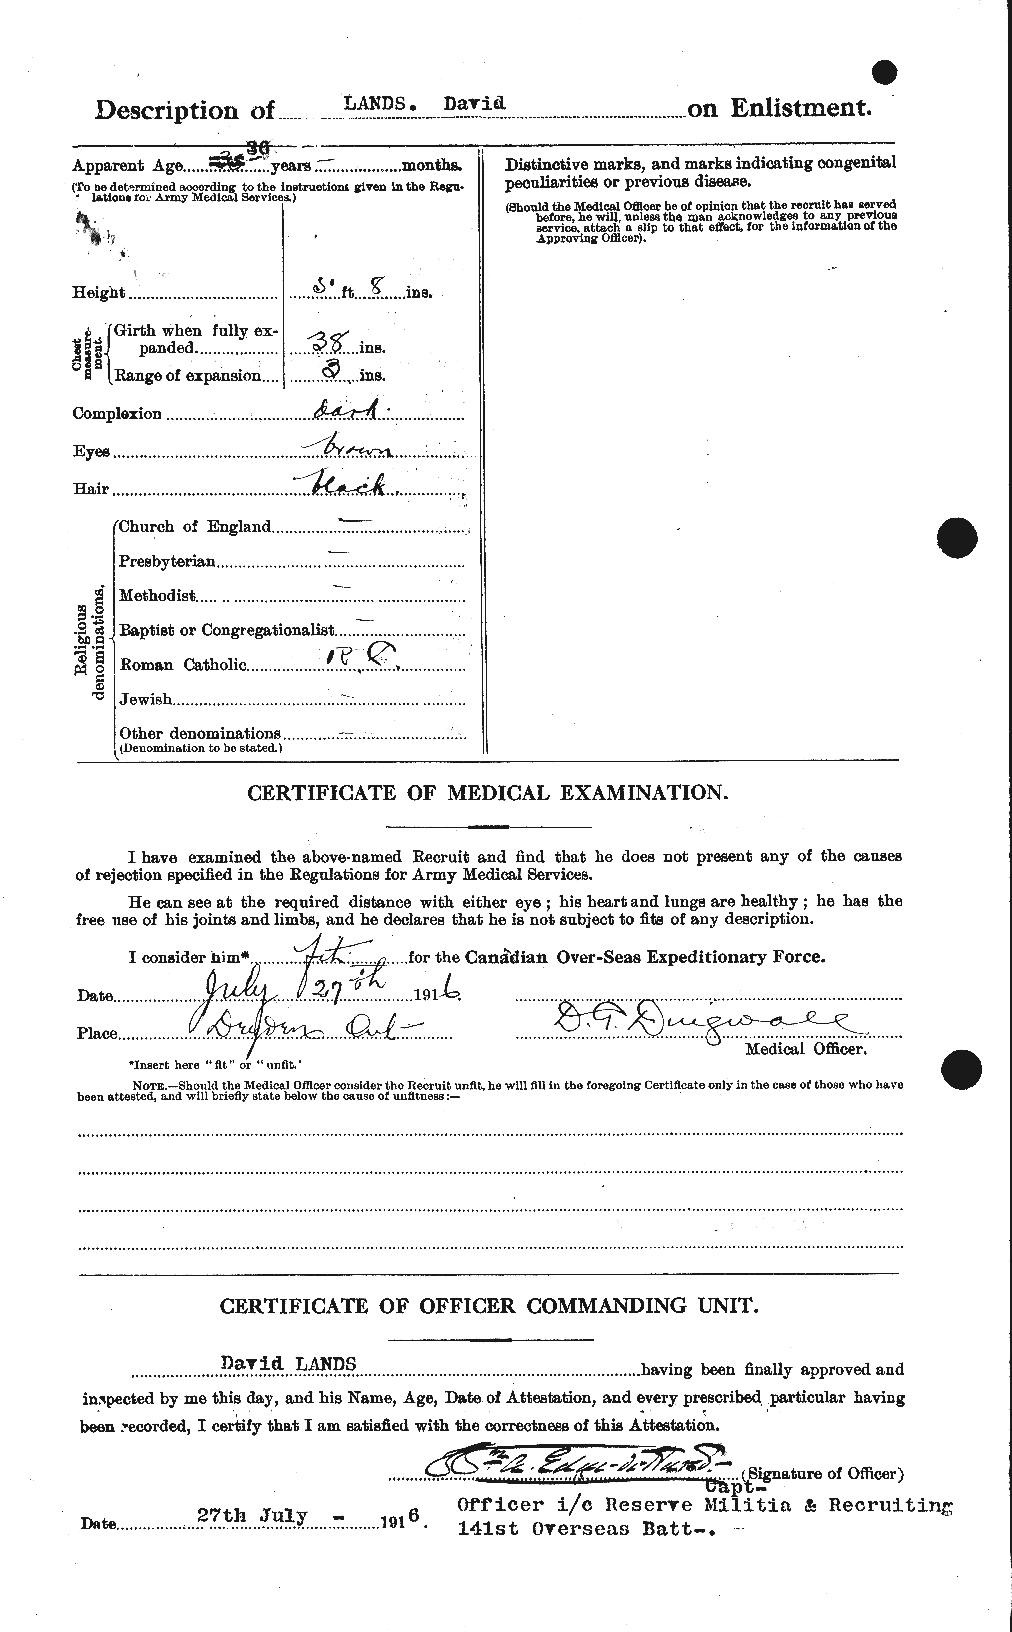 Personnel Records of the First World War - CEF 447434b